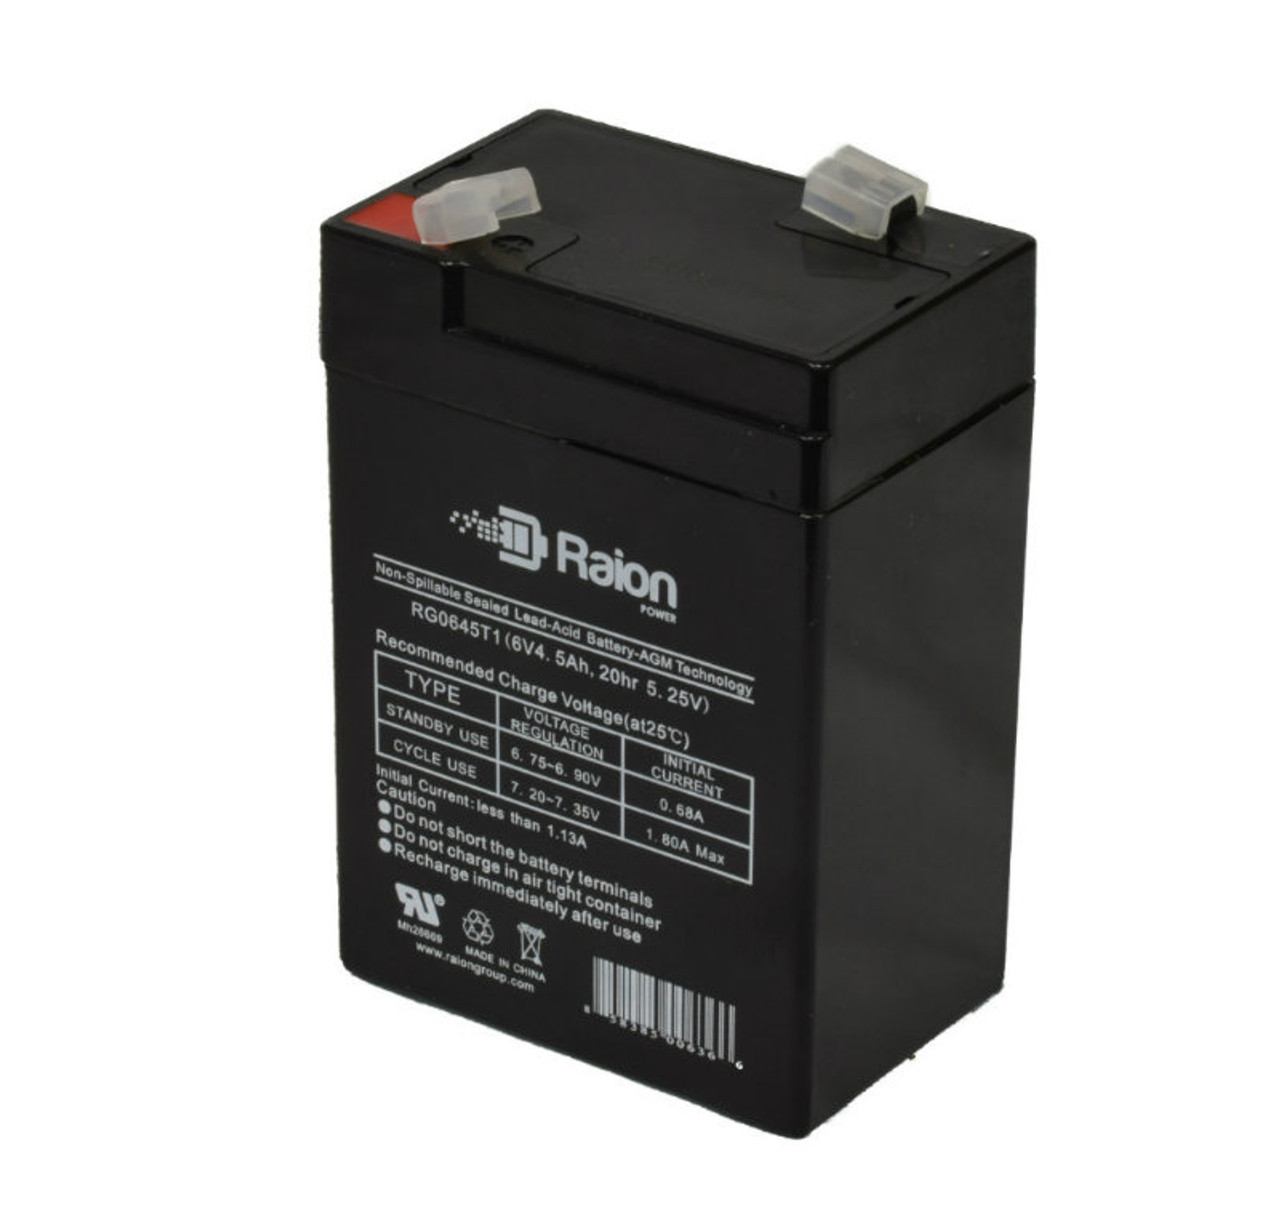 Raion Power RG0645T1 6V 4.5Ah Replacement Battery Cartridge for BSB GB6-4.2